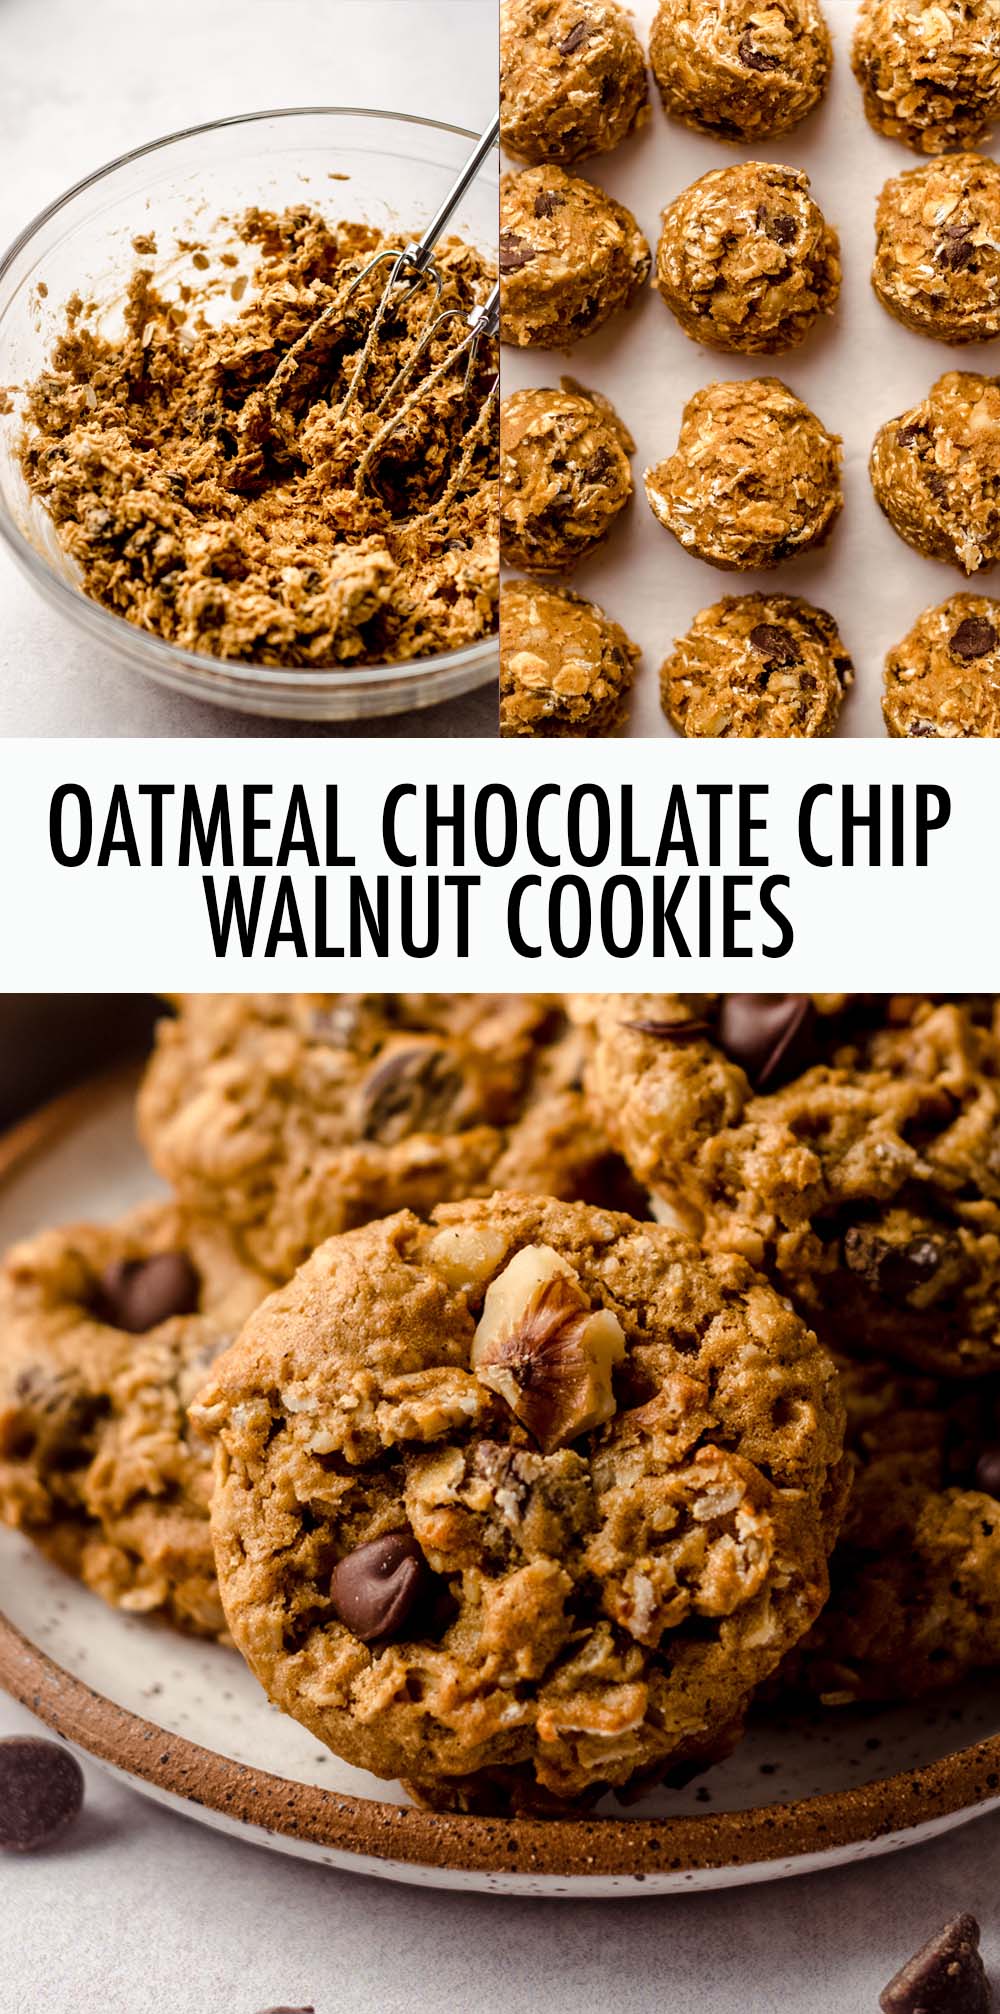 These soft and chewy oatmeal chocolate chip cookies are fully loaded with chocolate chips and walnuts. via @frshaprilflours